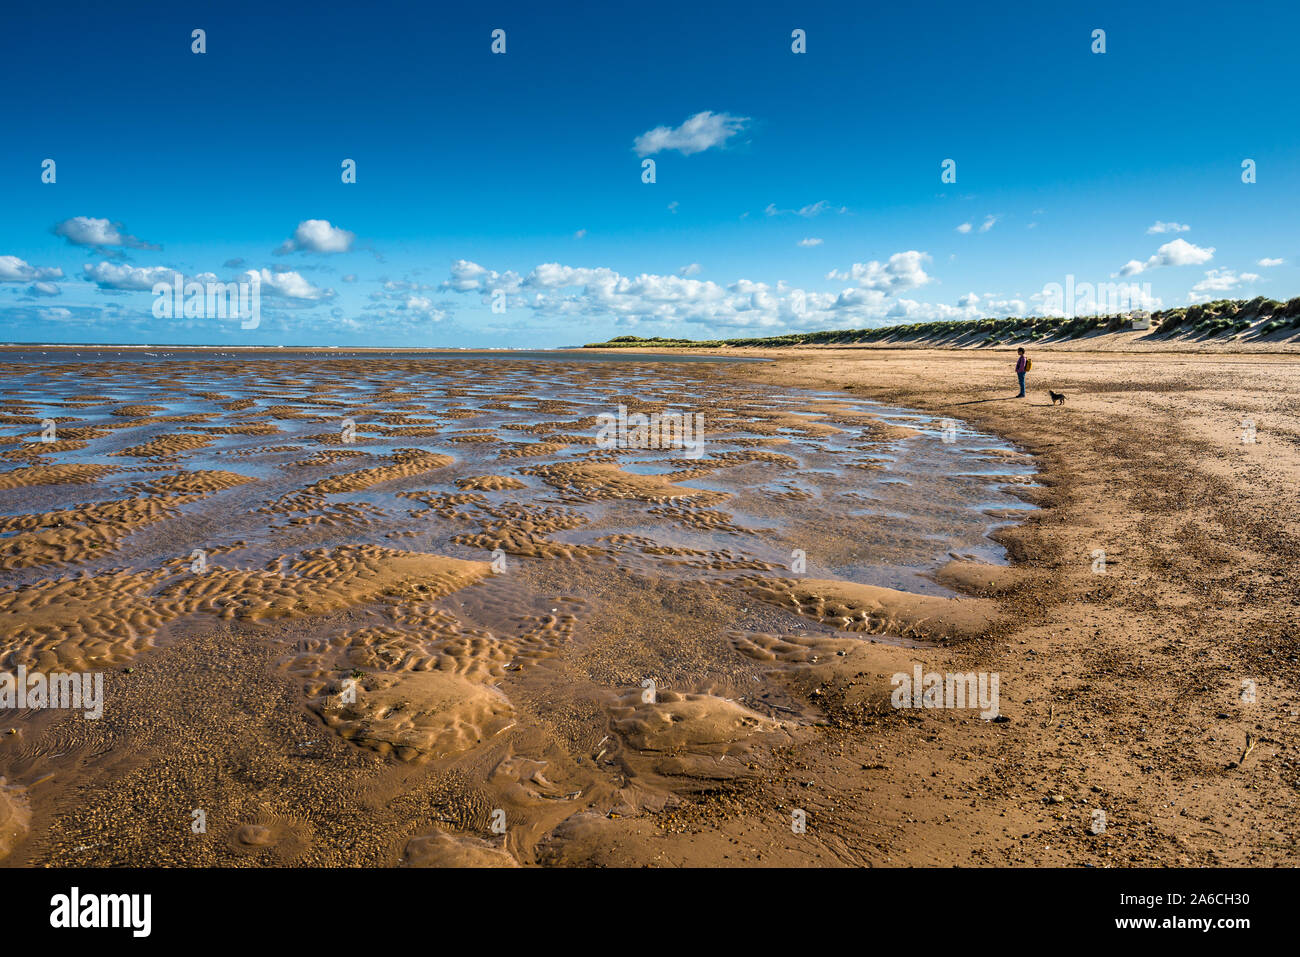 Patterns made by tide pools of water at low tide on Burnham Overy Staithe beach on Holkham bay, North Norfolk coast, East Anglia, England, UK. Stock Photo